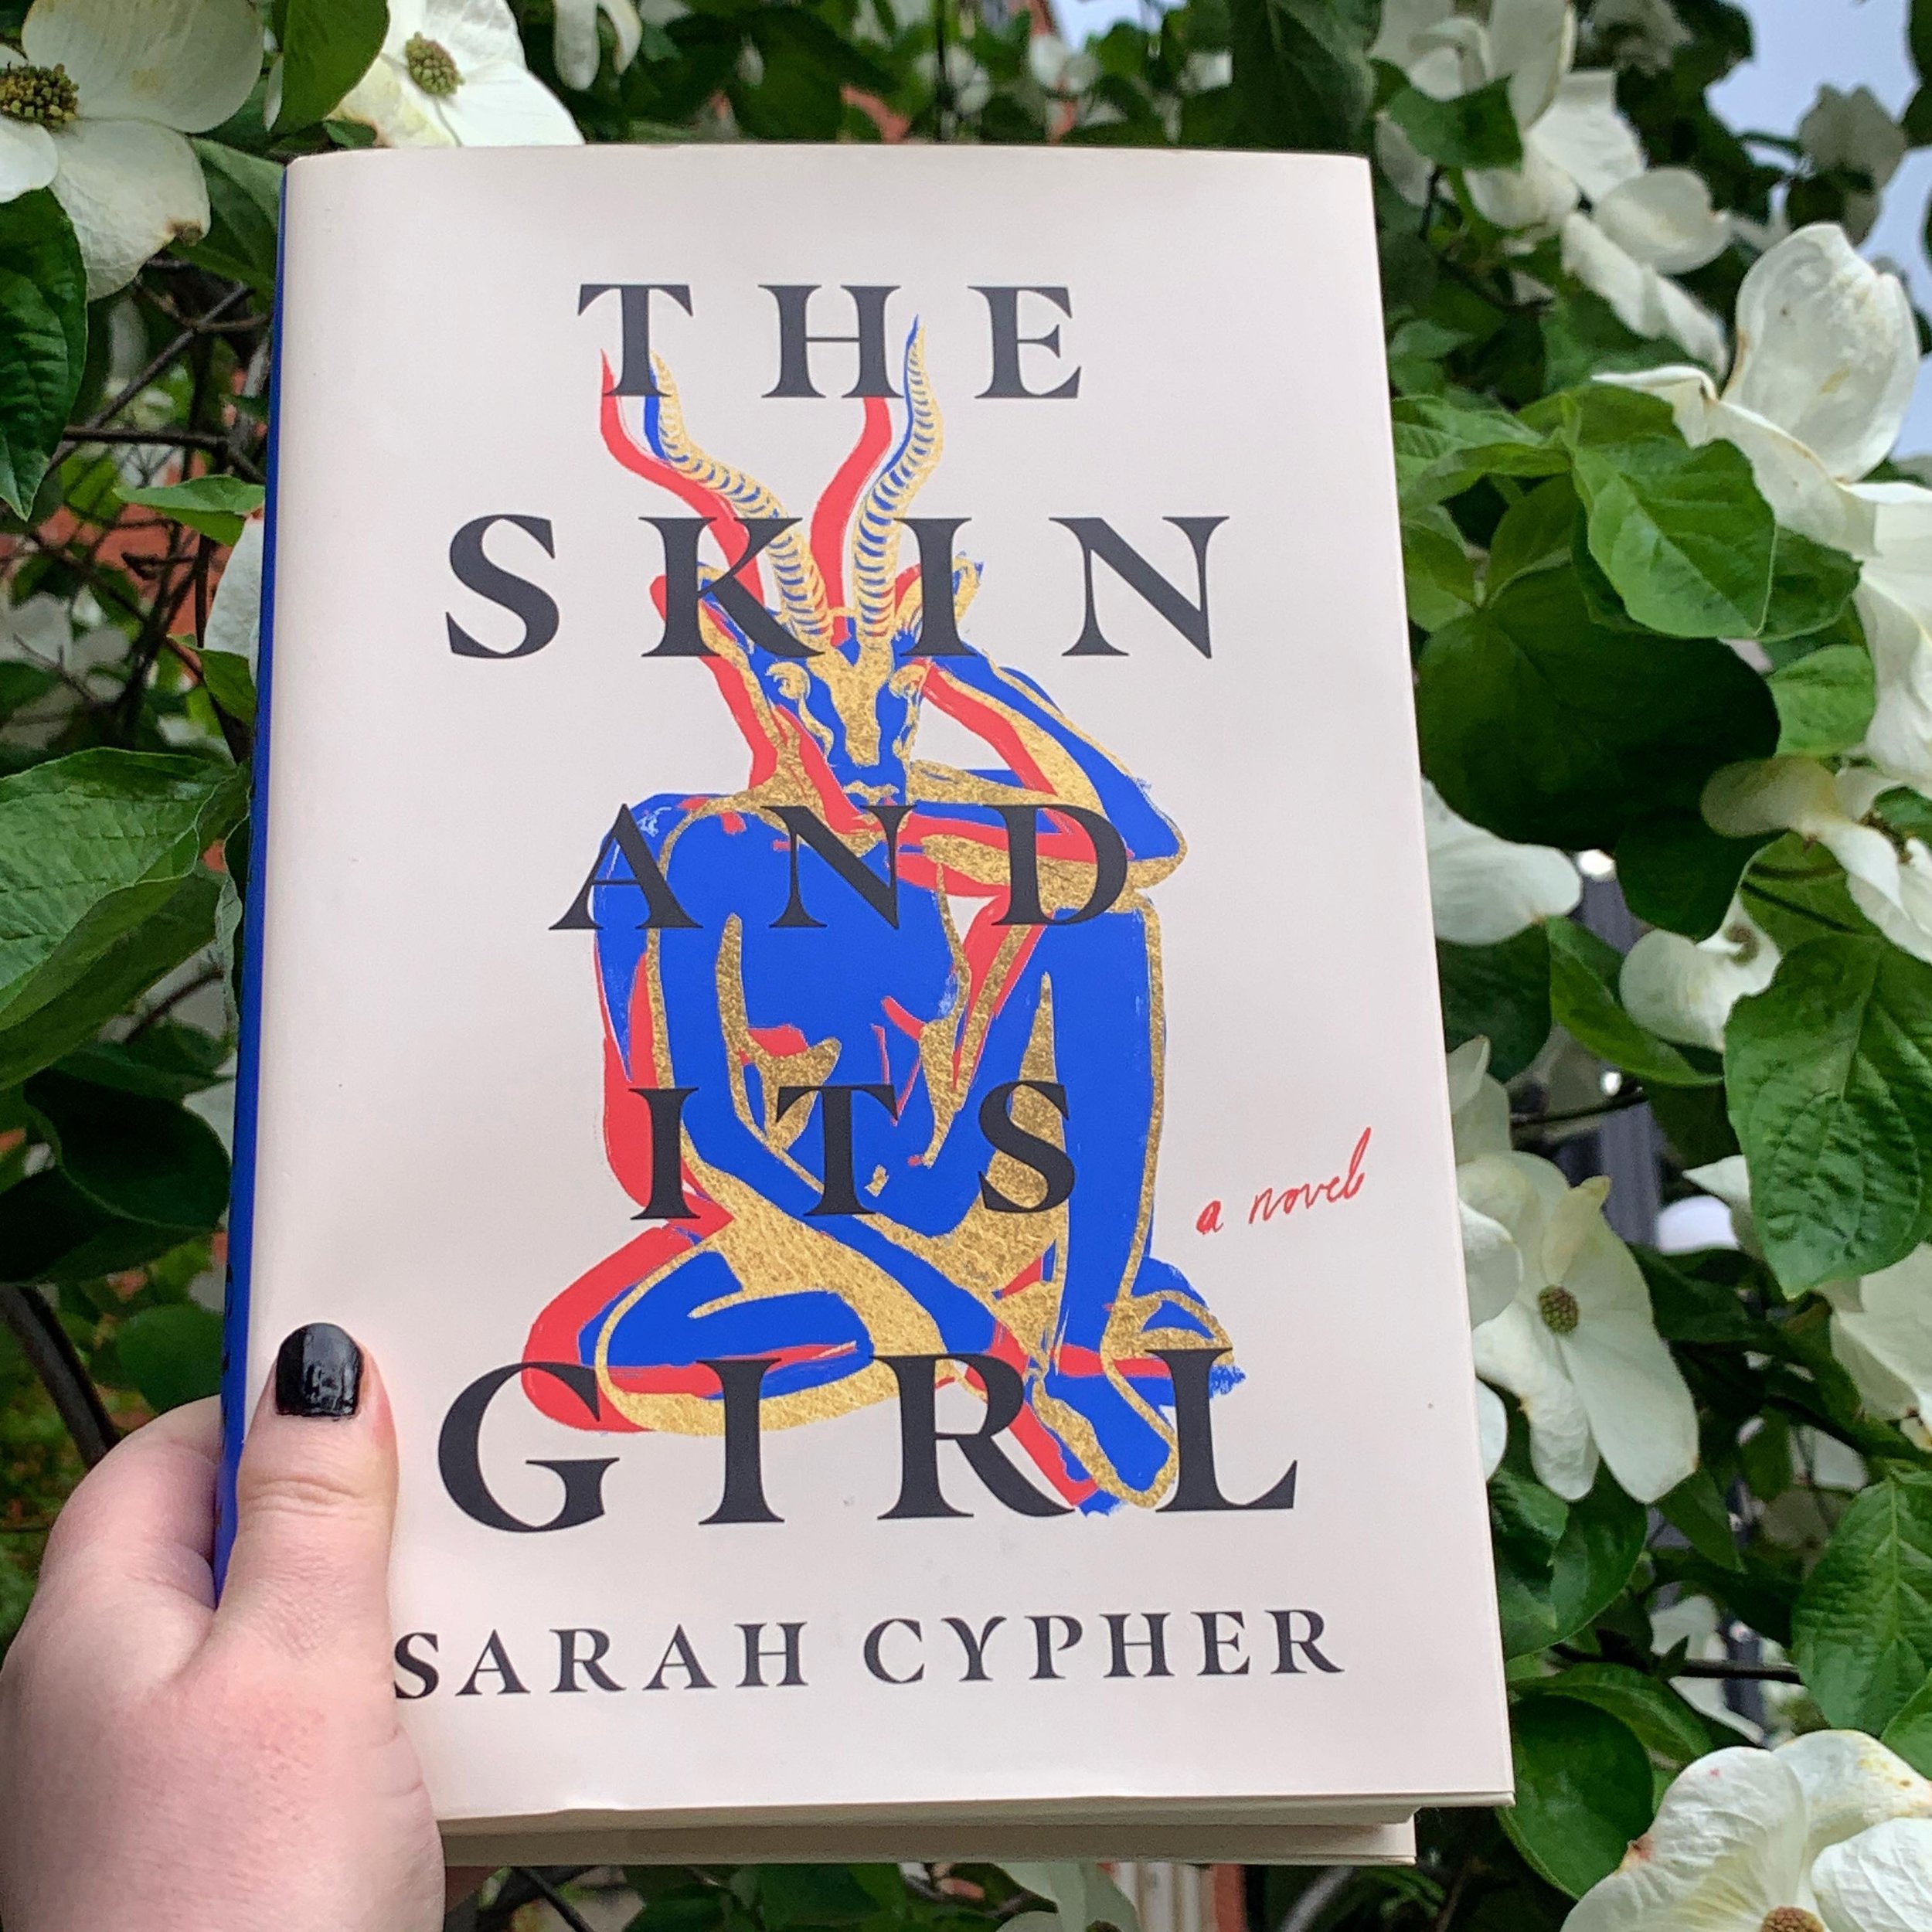 April has absolutely flown by, and so we&rsquo;ve shifted our meeting dates for THE SKIN AND ITS GIRL. I&rsquo;m very much looking forward to discussing this read with members, especially as I close in on the final 50 pages. 

This story has gripped 